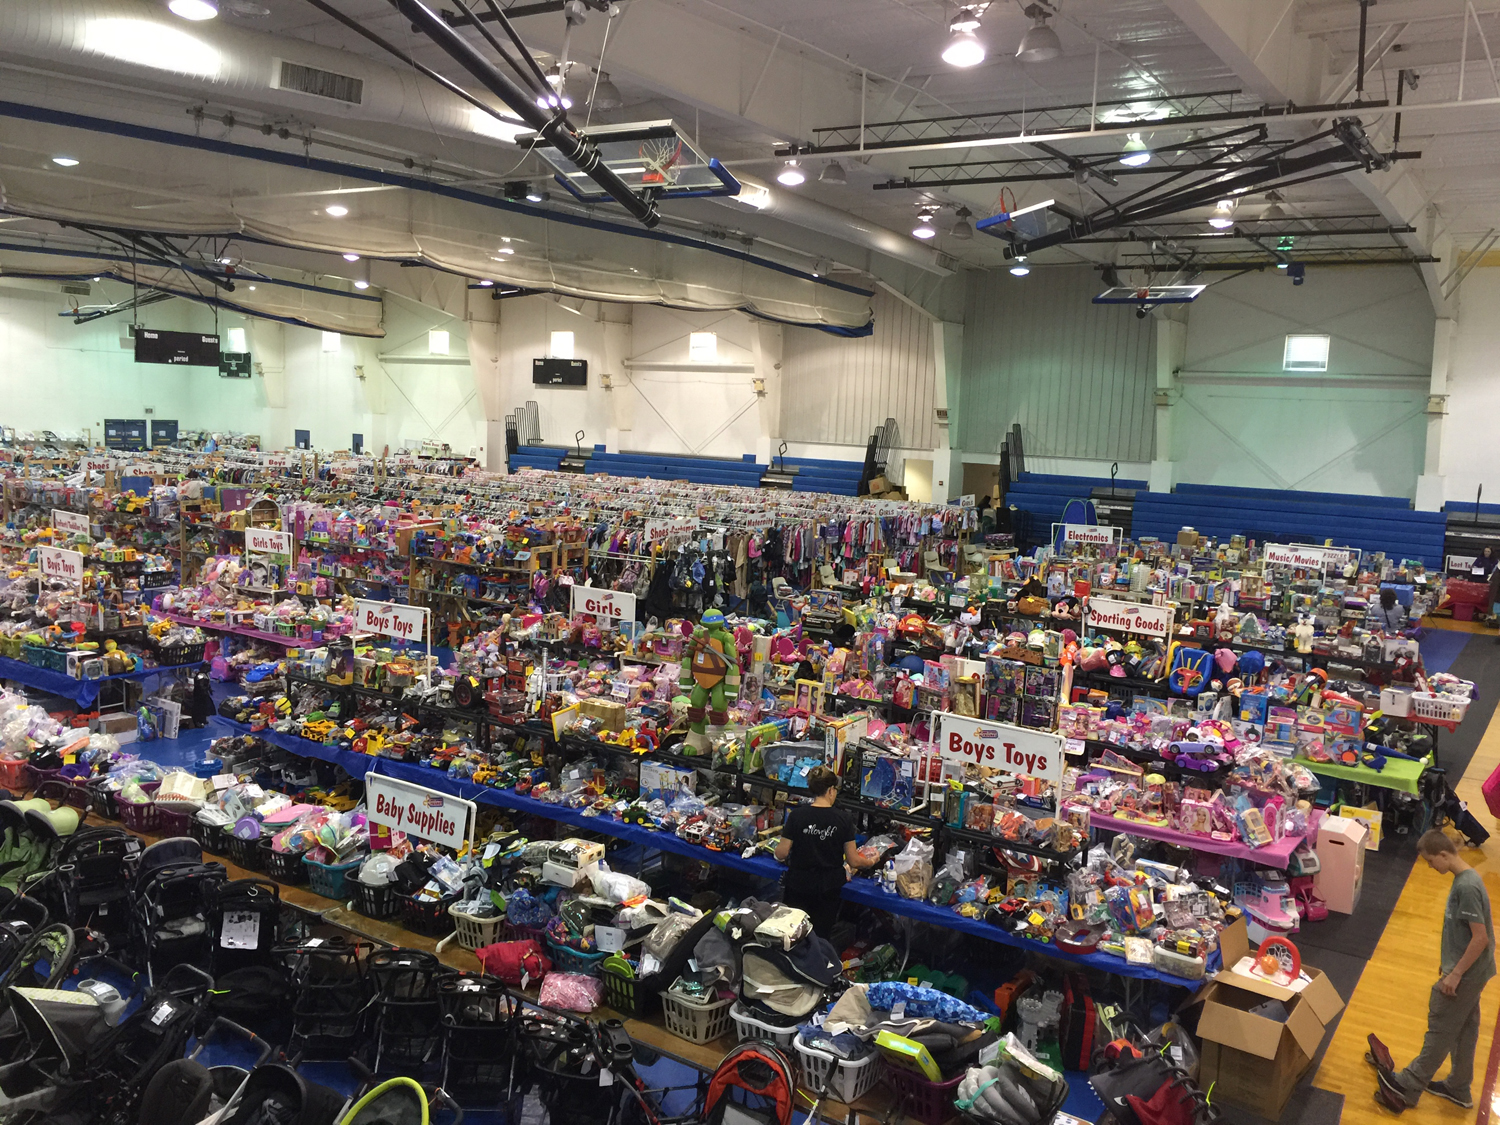 Huge Consignment Event Helps Local Families 1